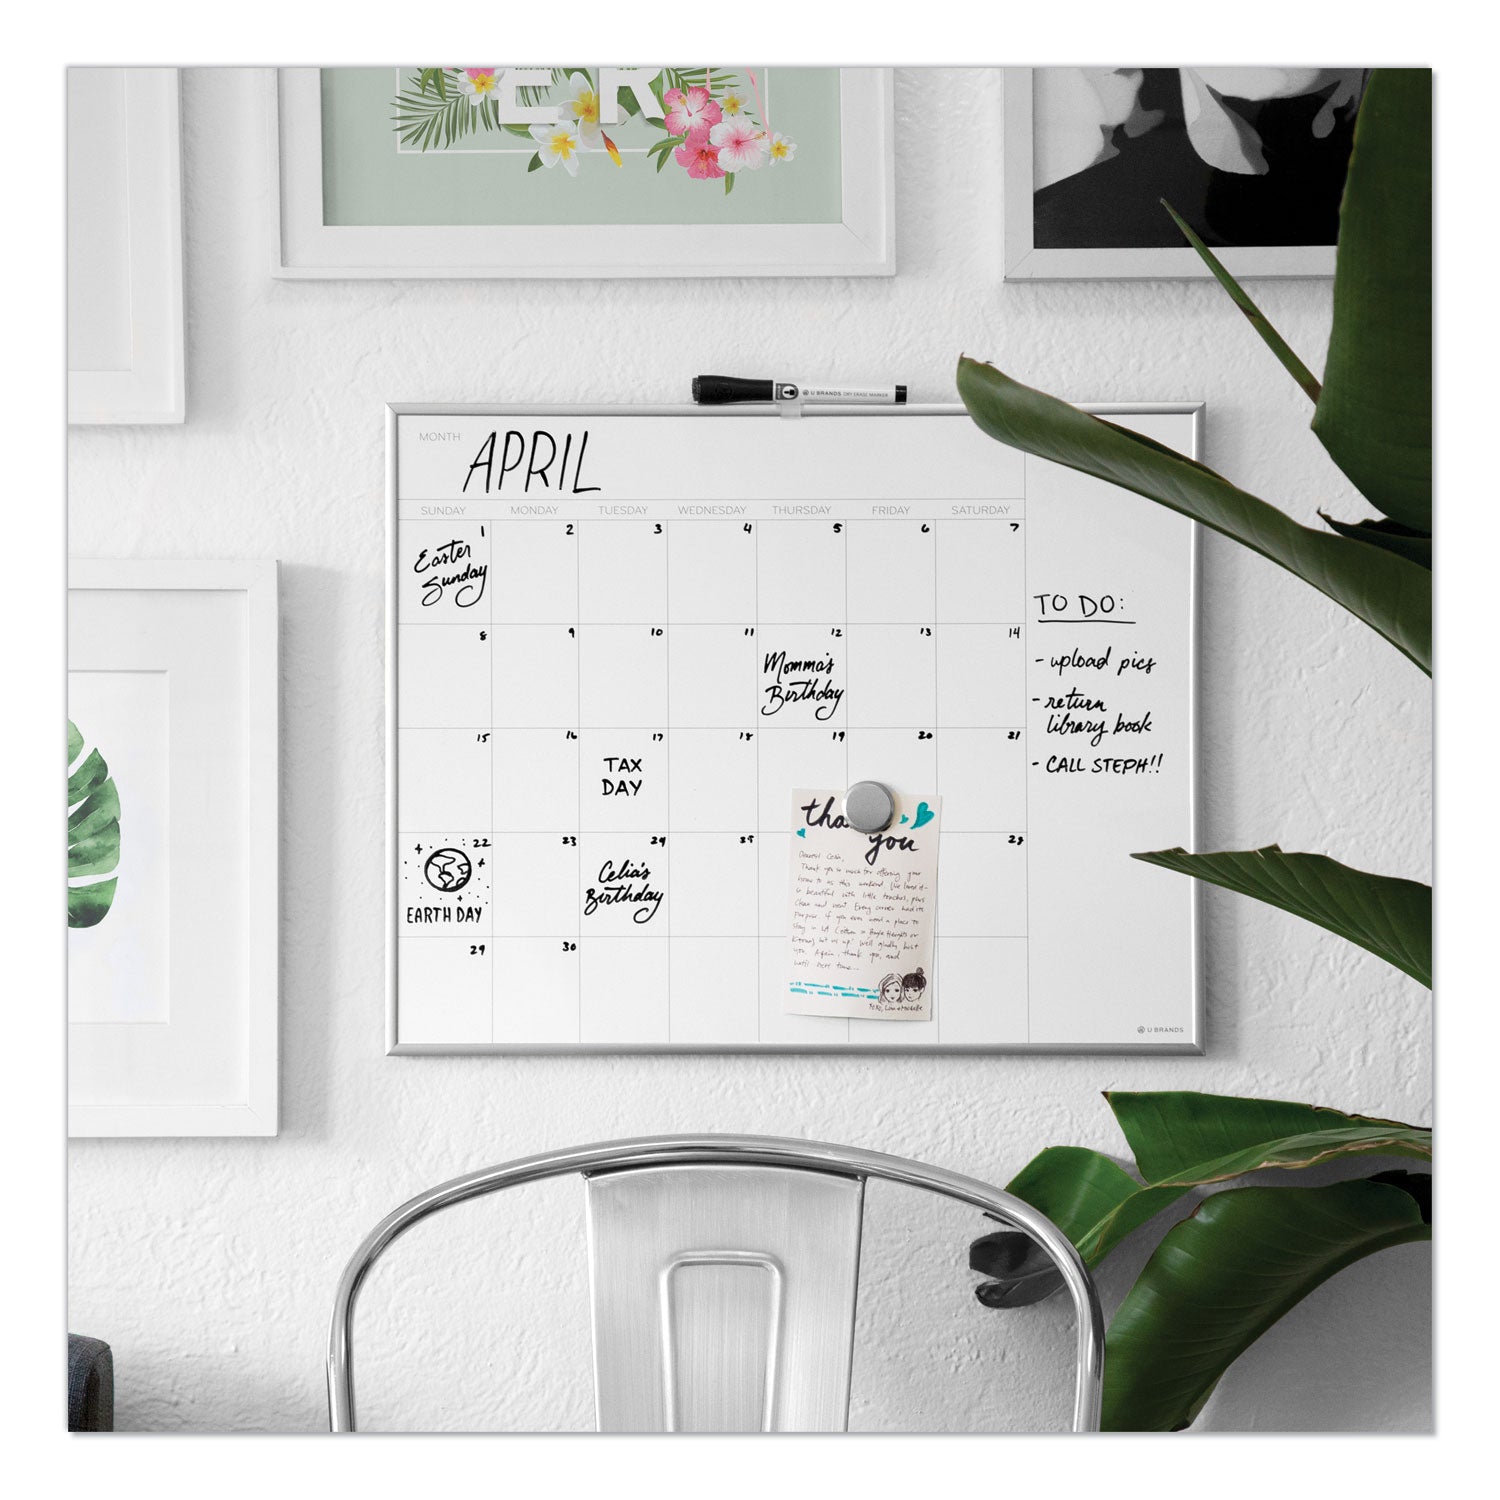 magnetic-dry-erase-board-undated-one-month-20-x-16-white-surface-silver-aluminum-frame_ubr361u0001 - 2